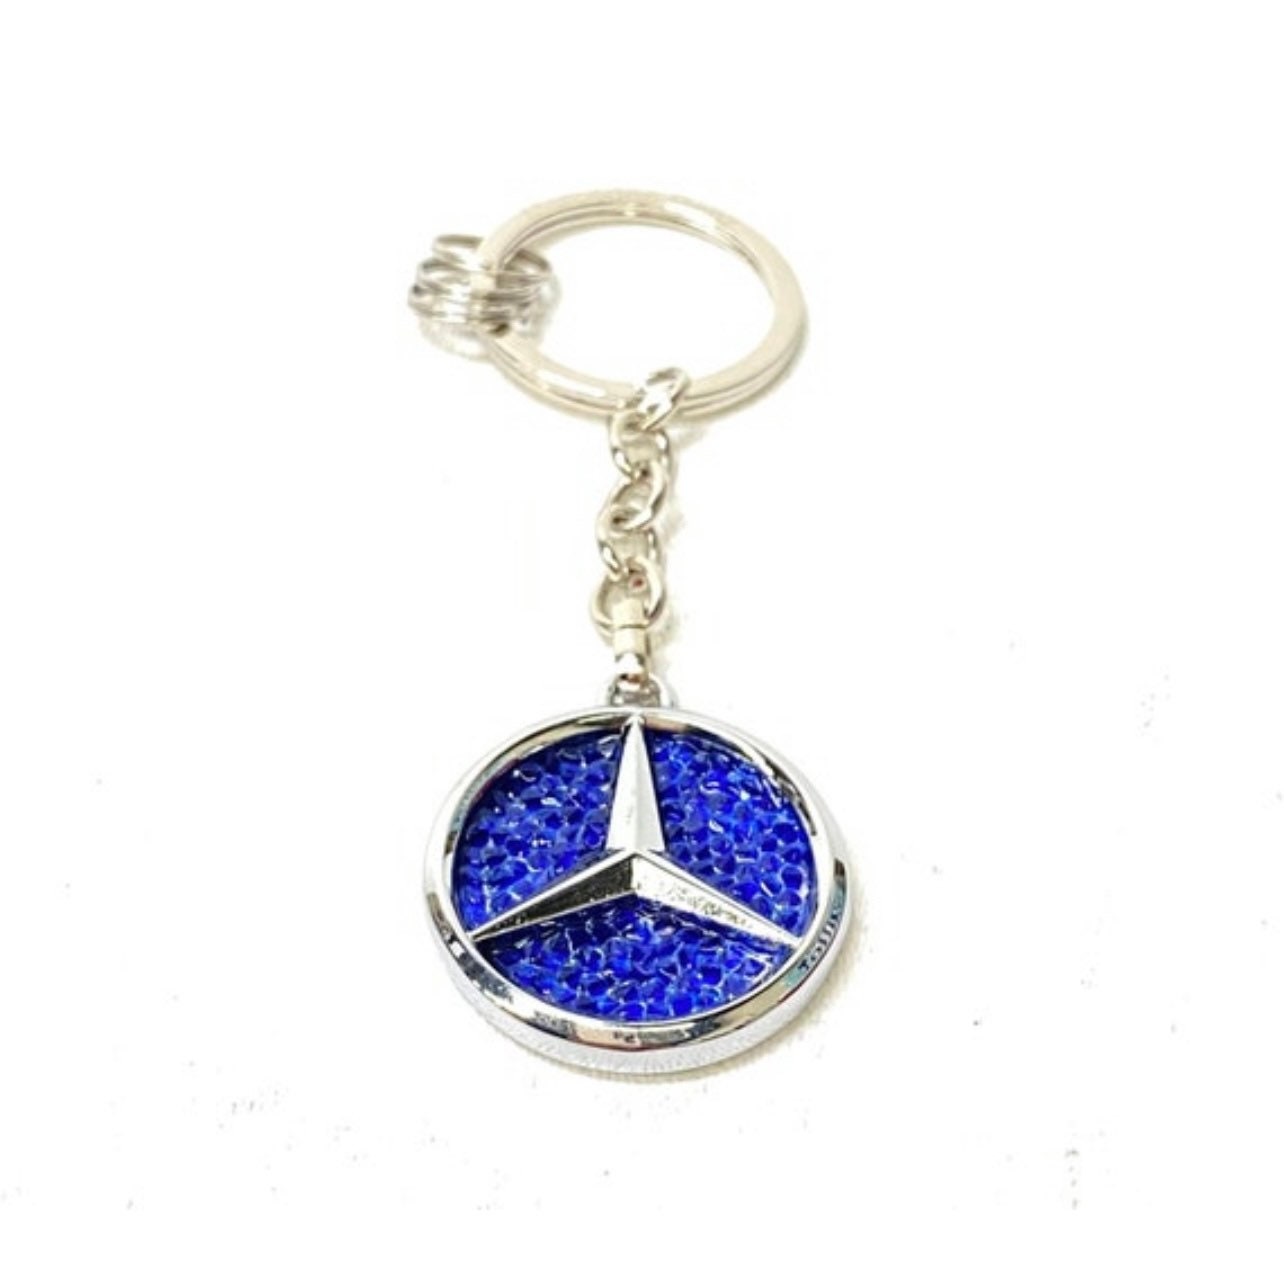 Model Series E-Class Key ring | Mercedes-Benz Lifestyle Collection